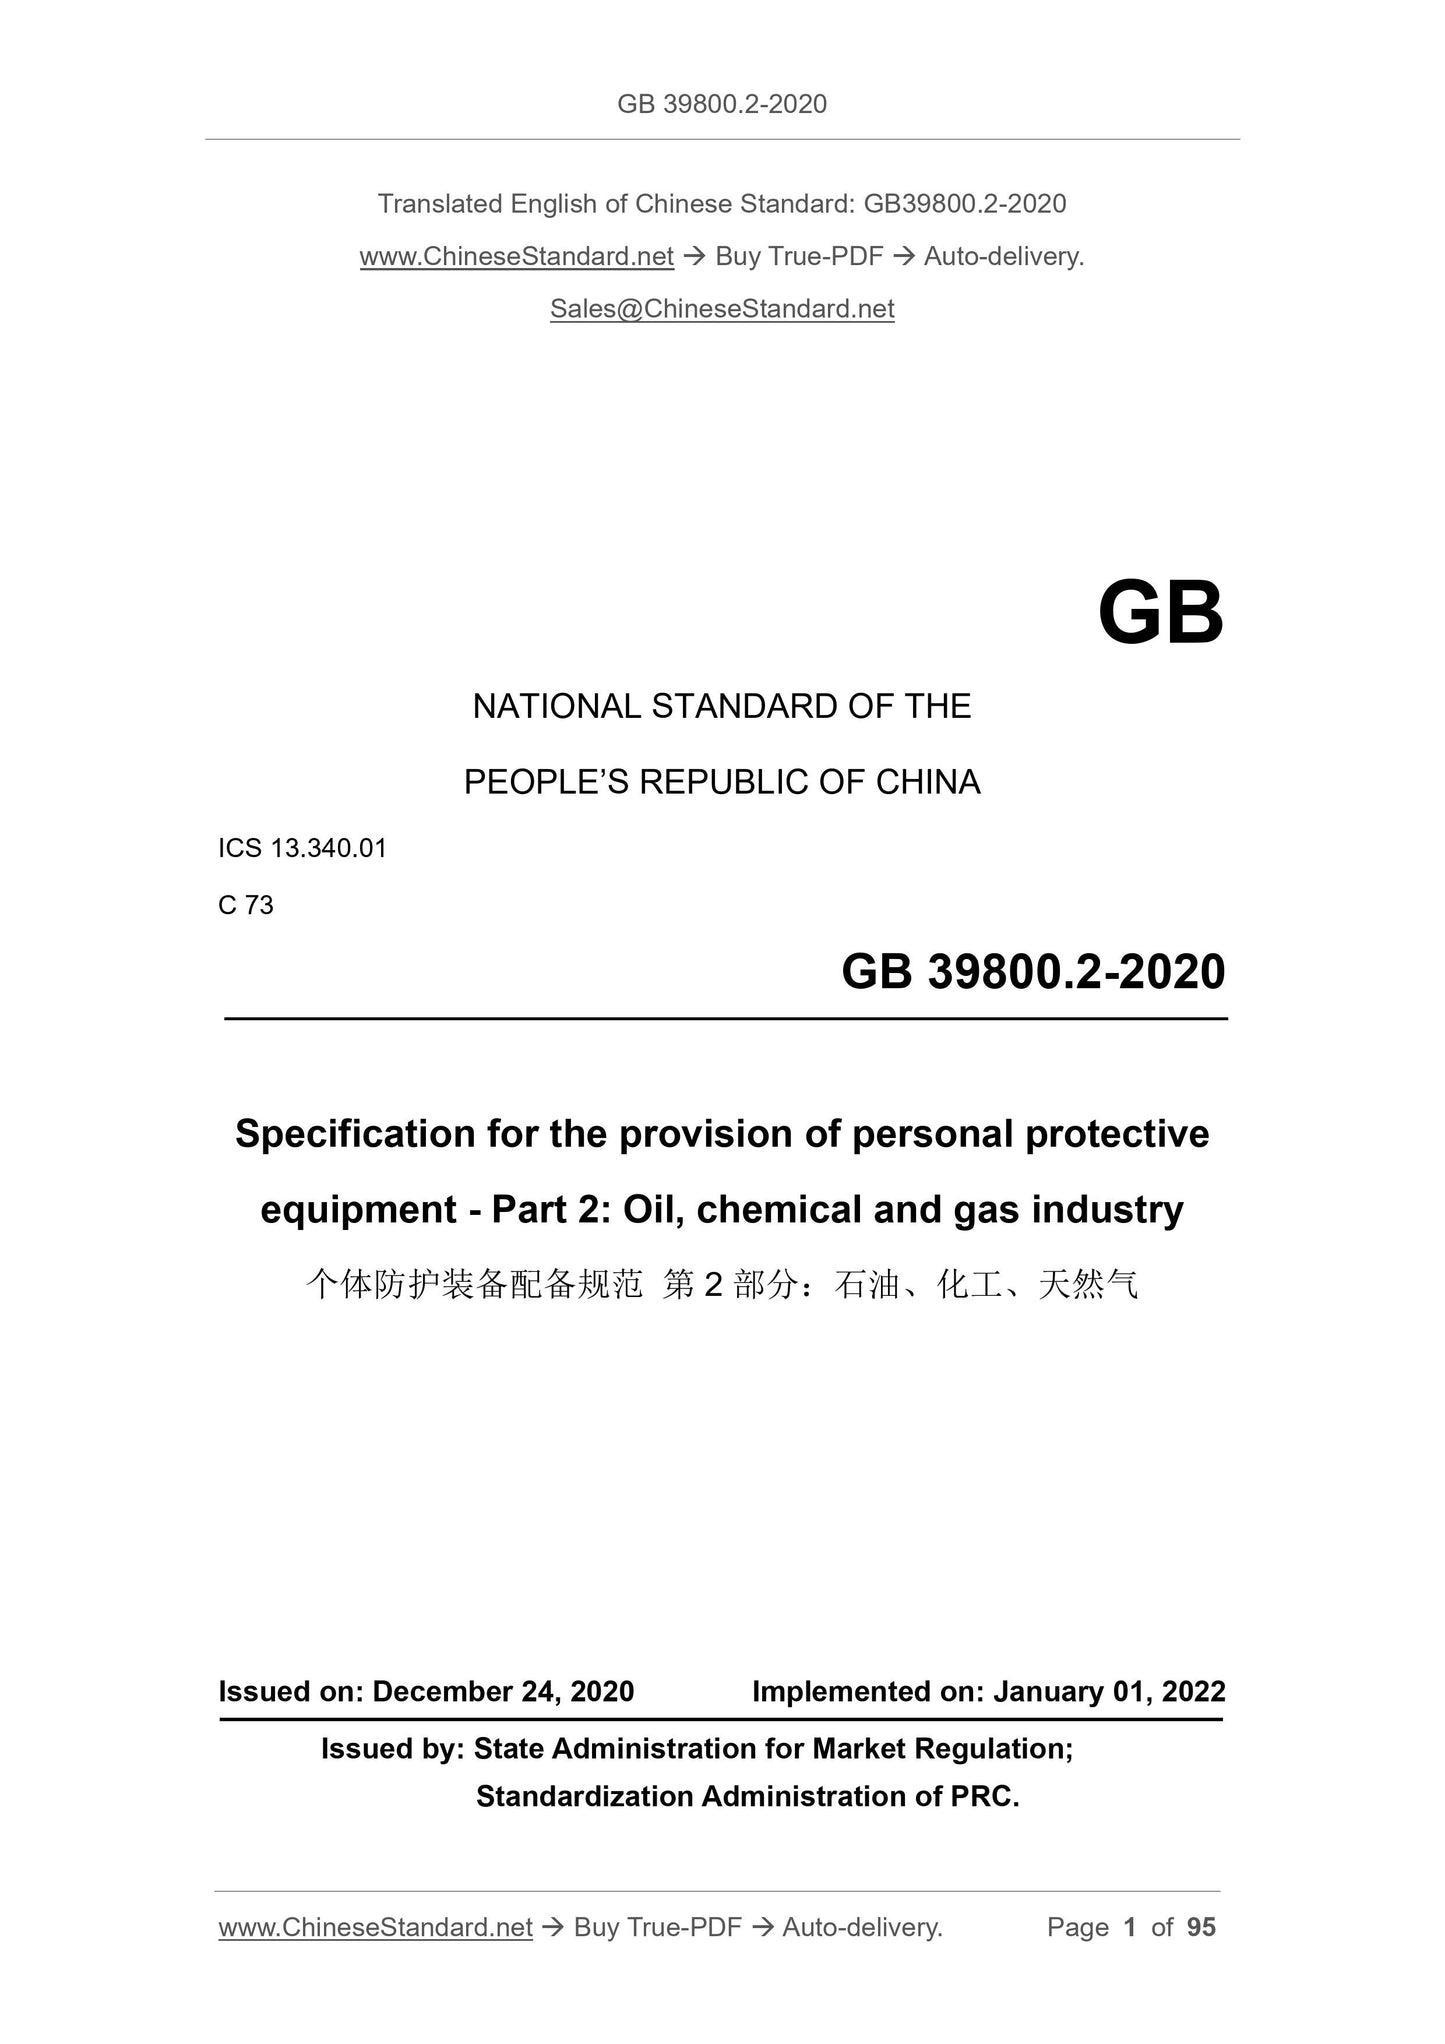 GB 39800.2-2020 Page 1